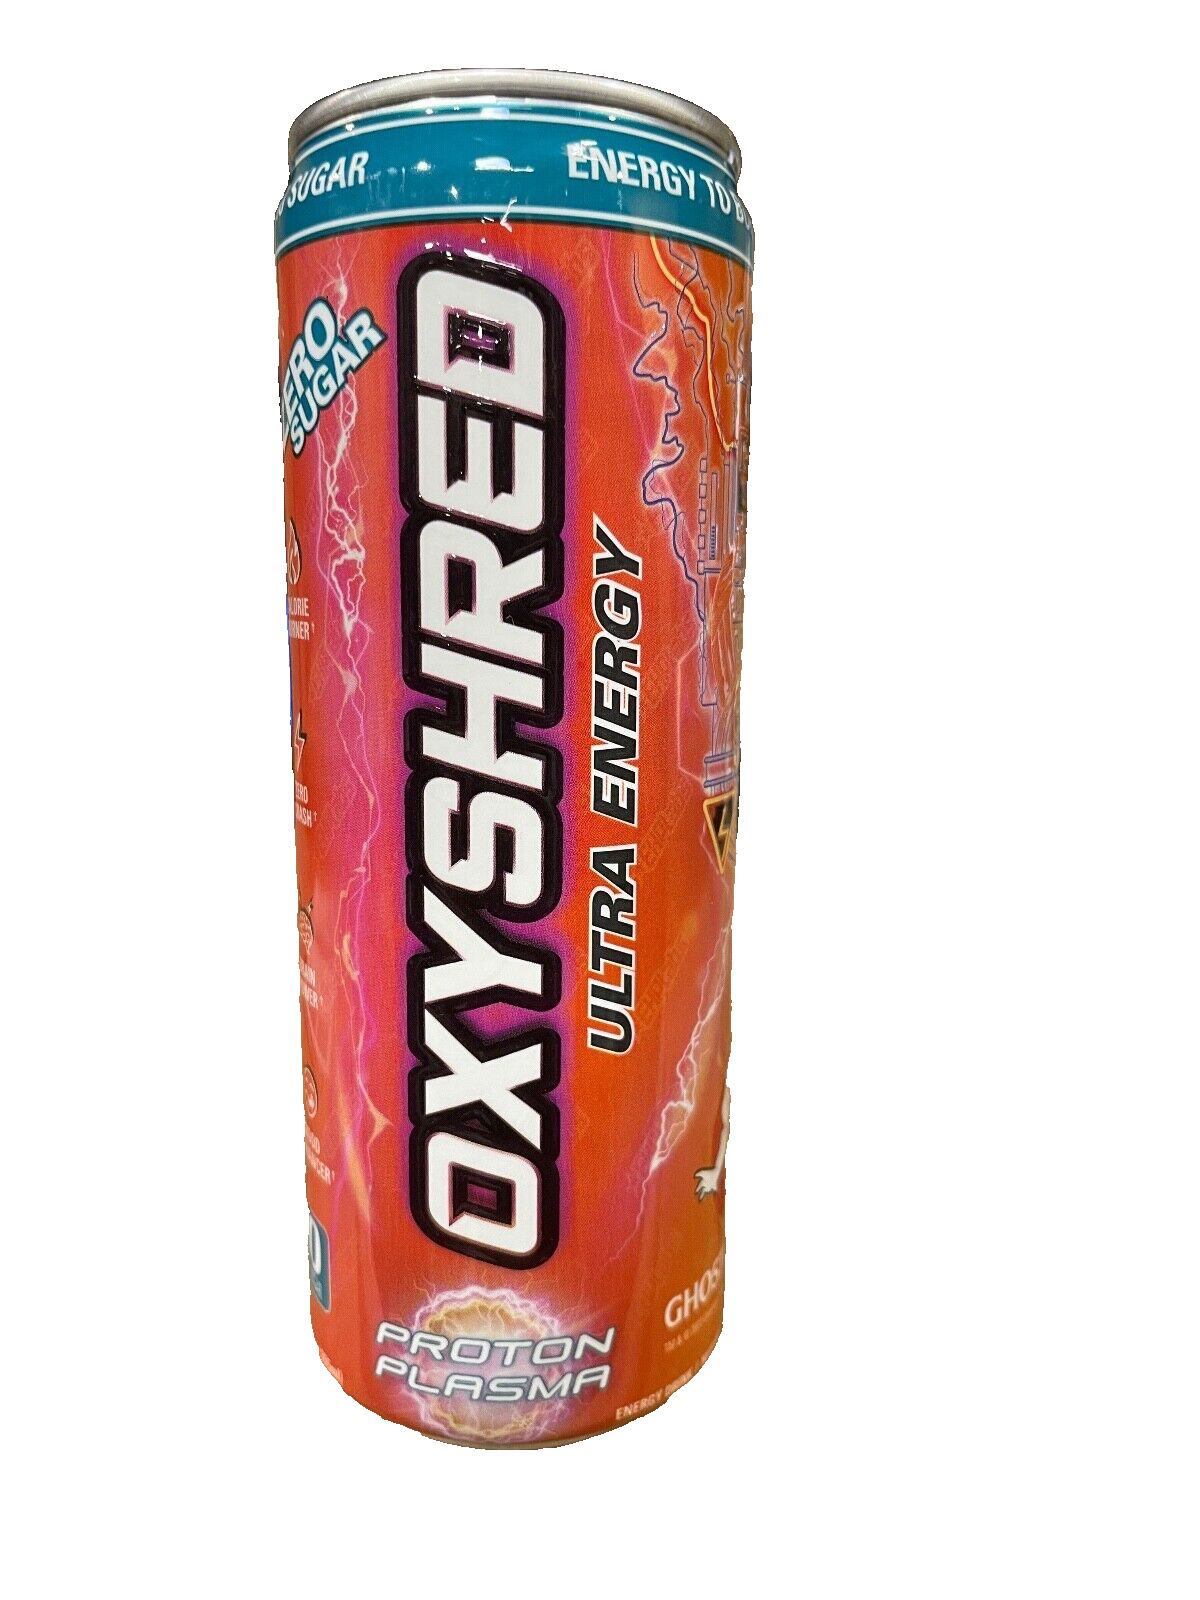 NEW EHPLABS X OXYSHRED GHOSTBUSTERS PROTON PLASMA ENERGY DRINK 1 12 FLOZ CAN